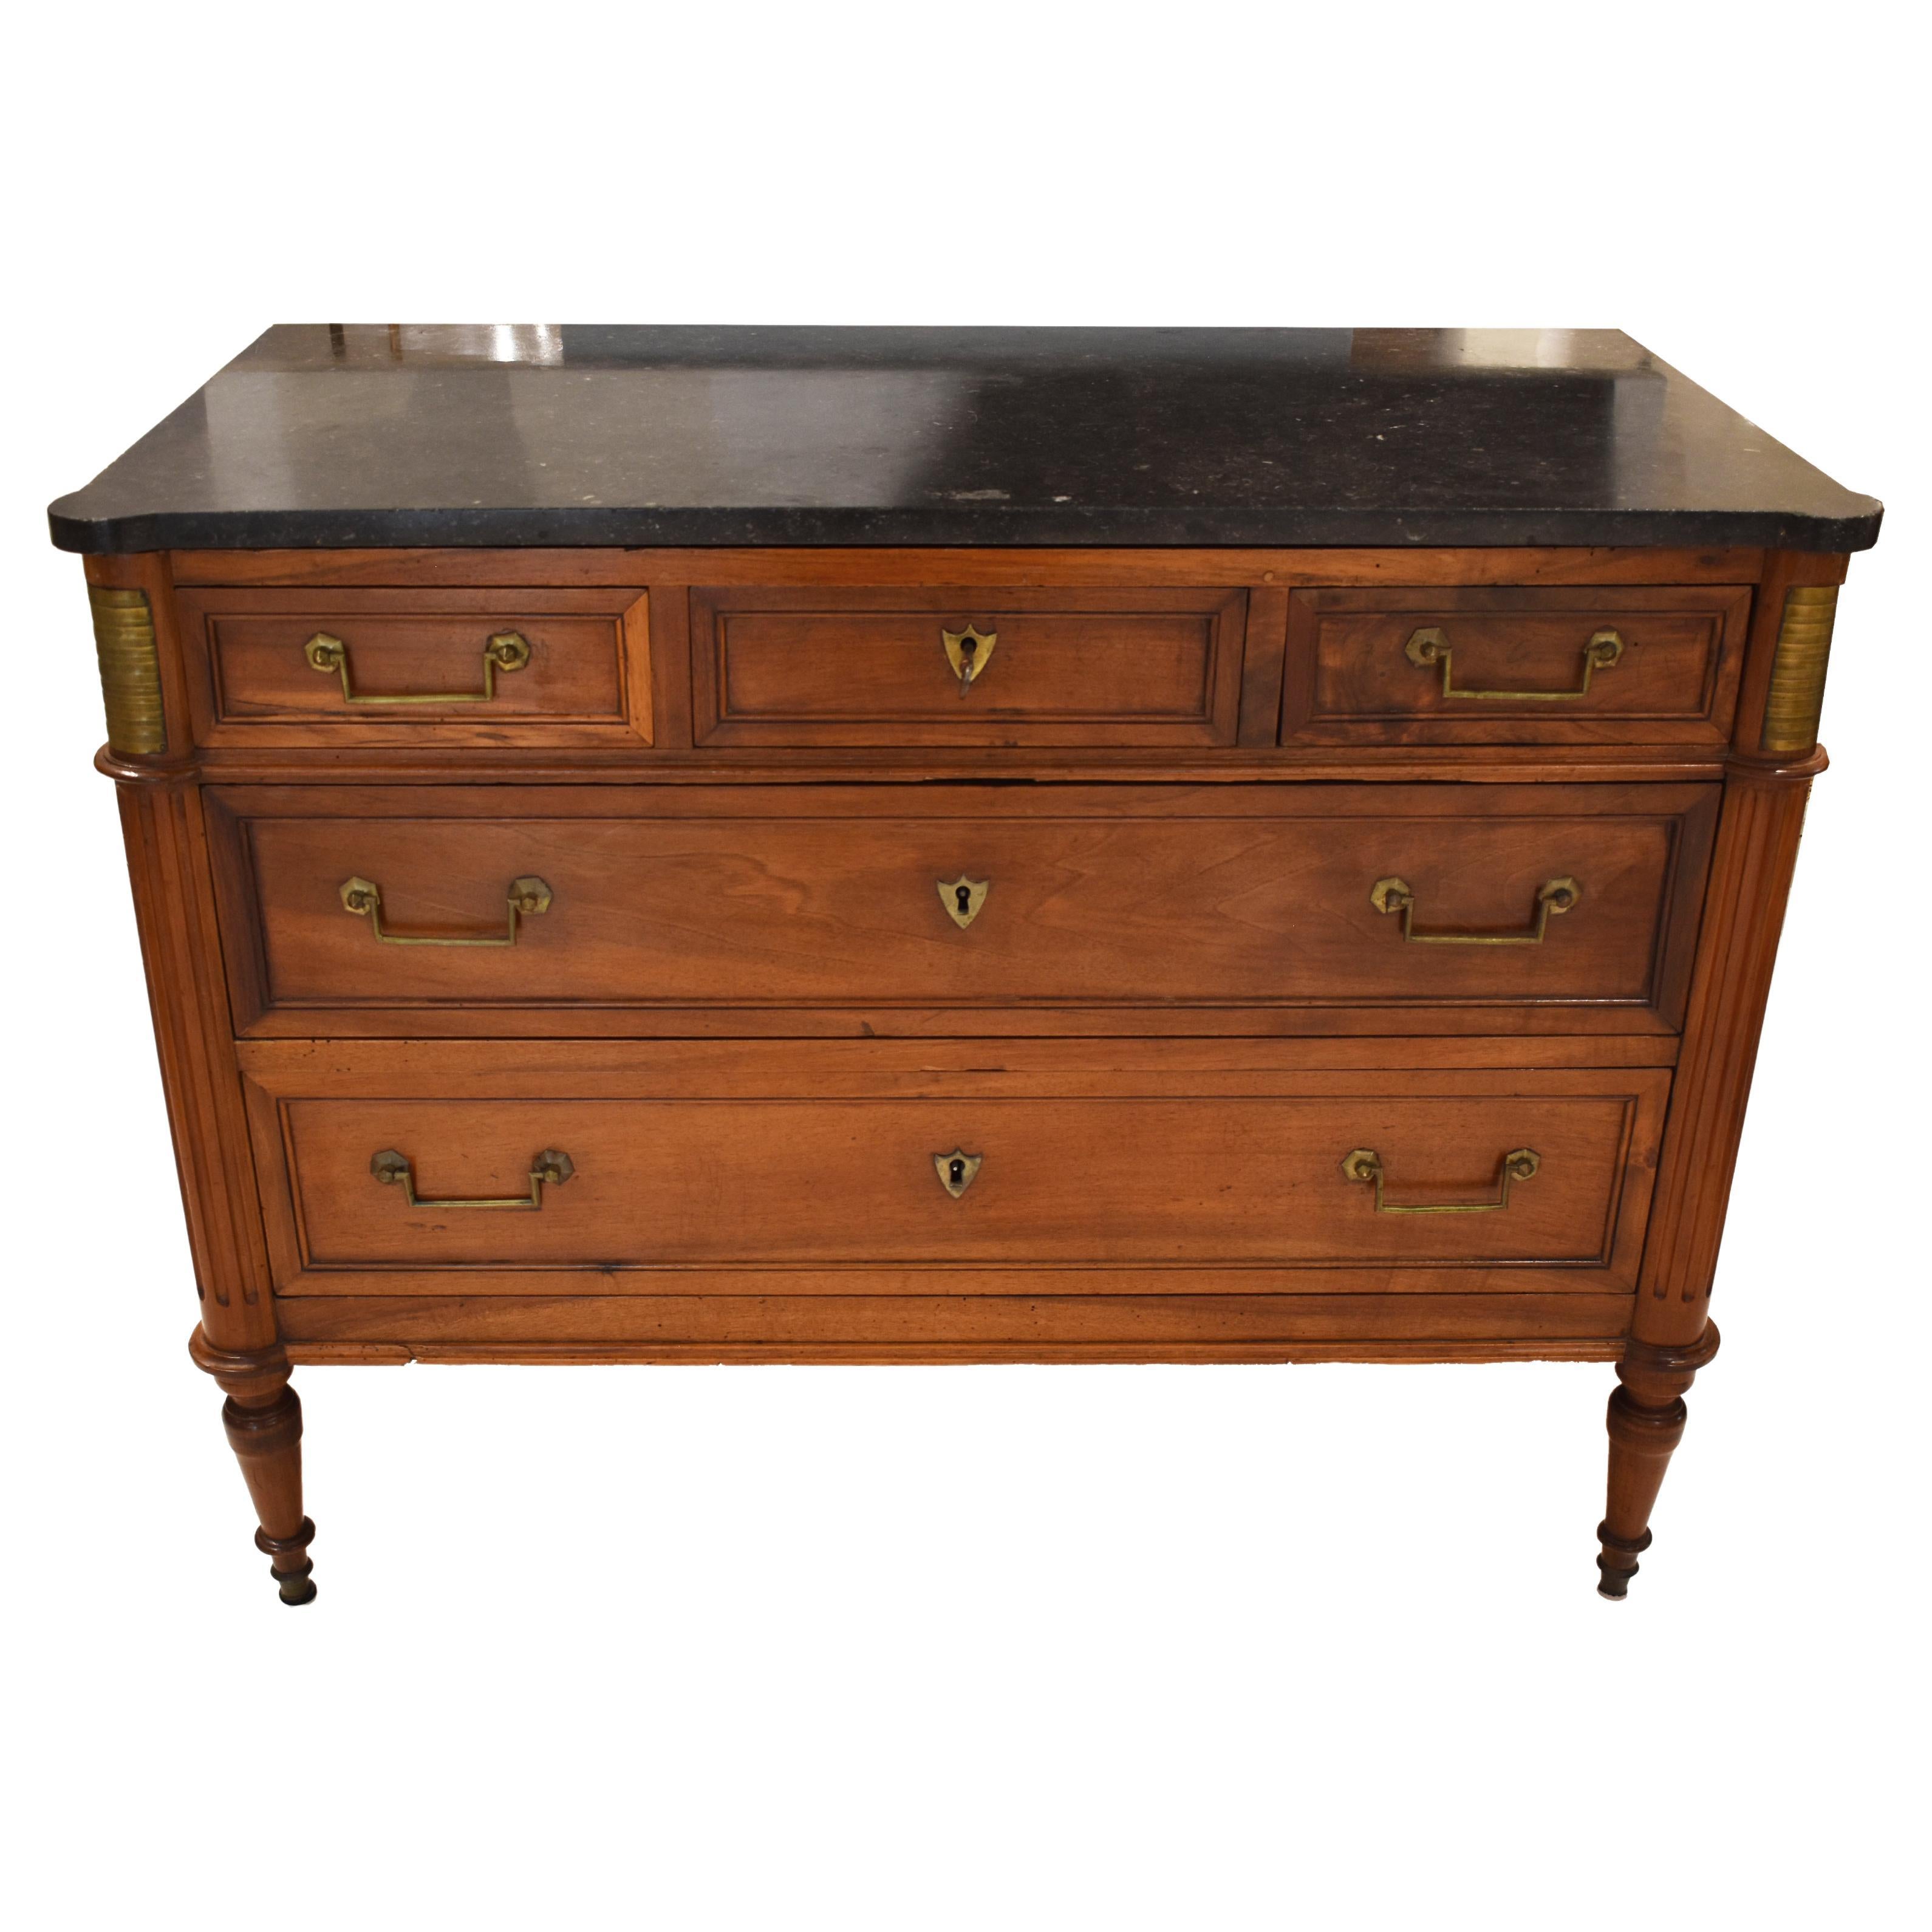 Walnut Commode with Marble Top, 19c French Louis XVI Style